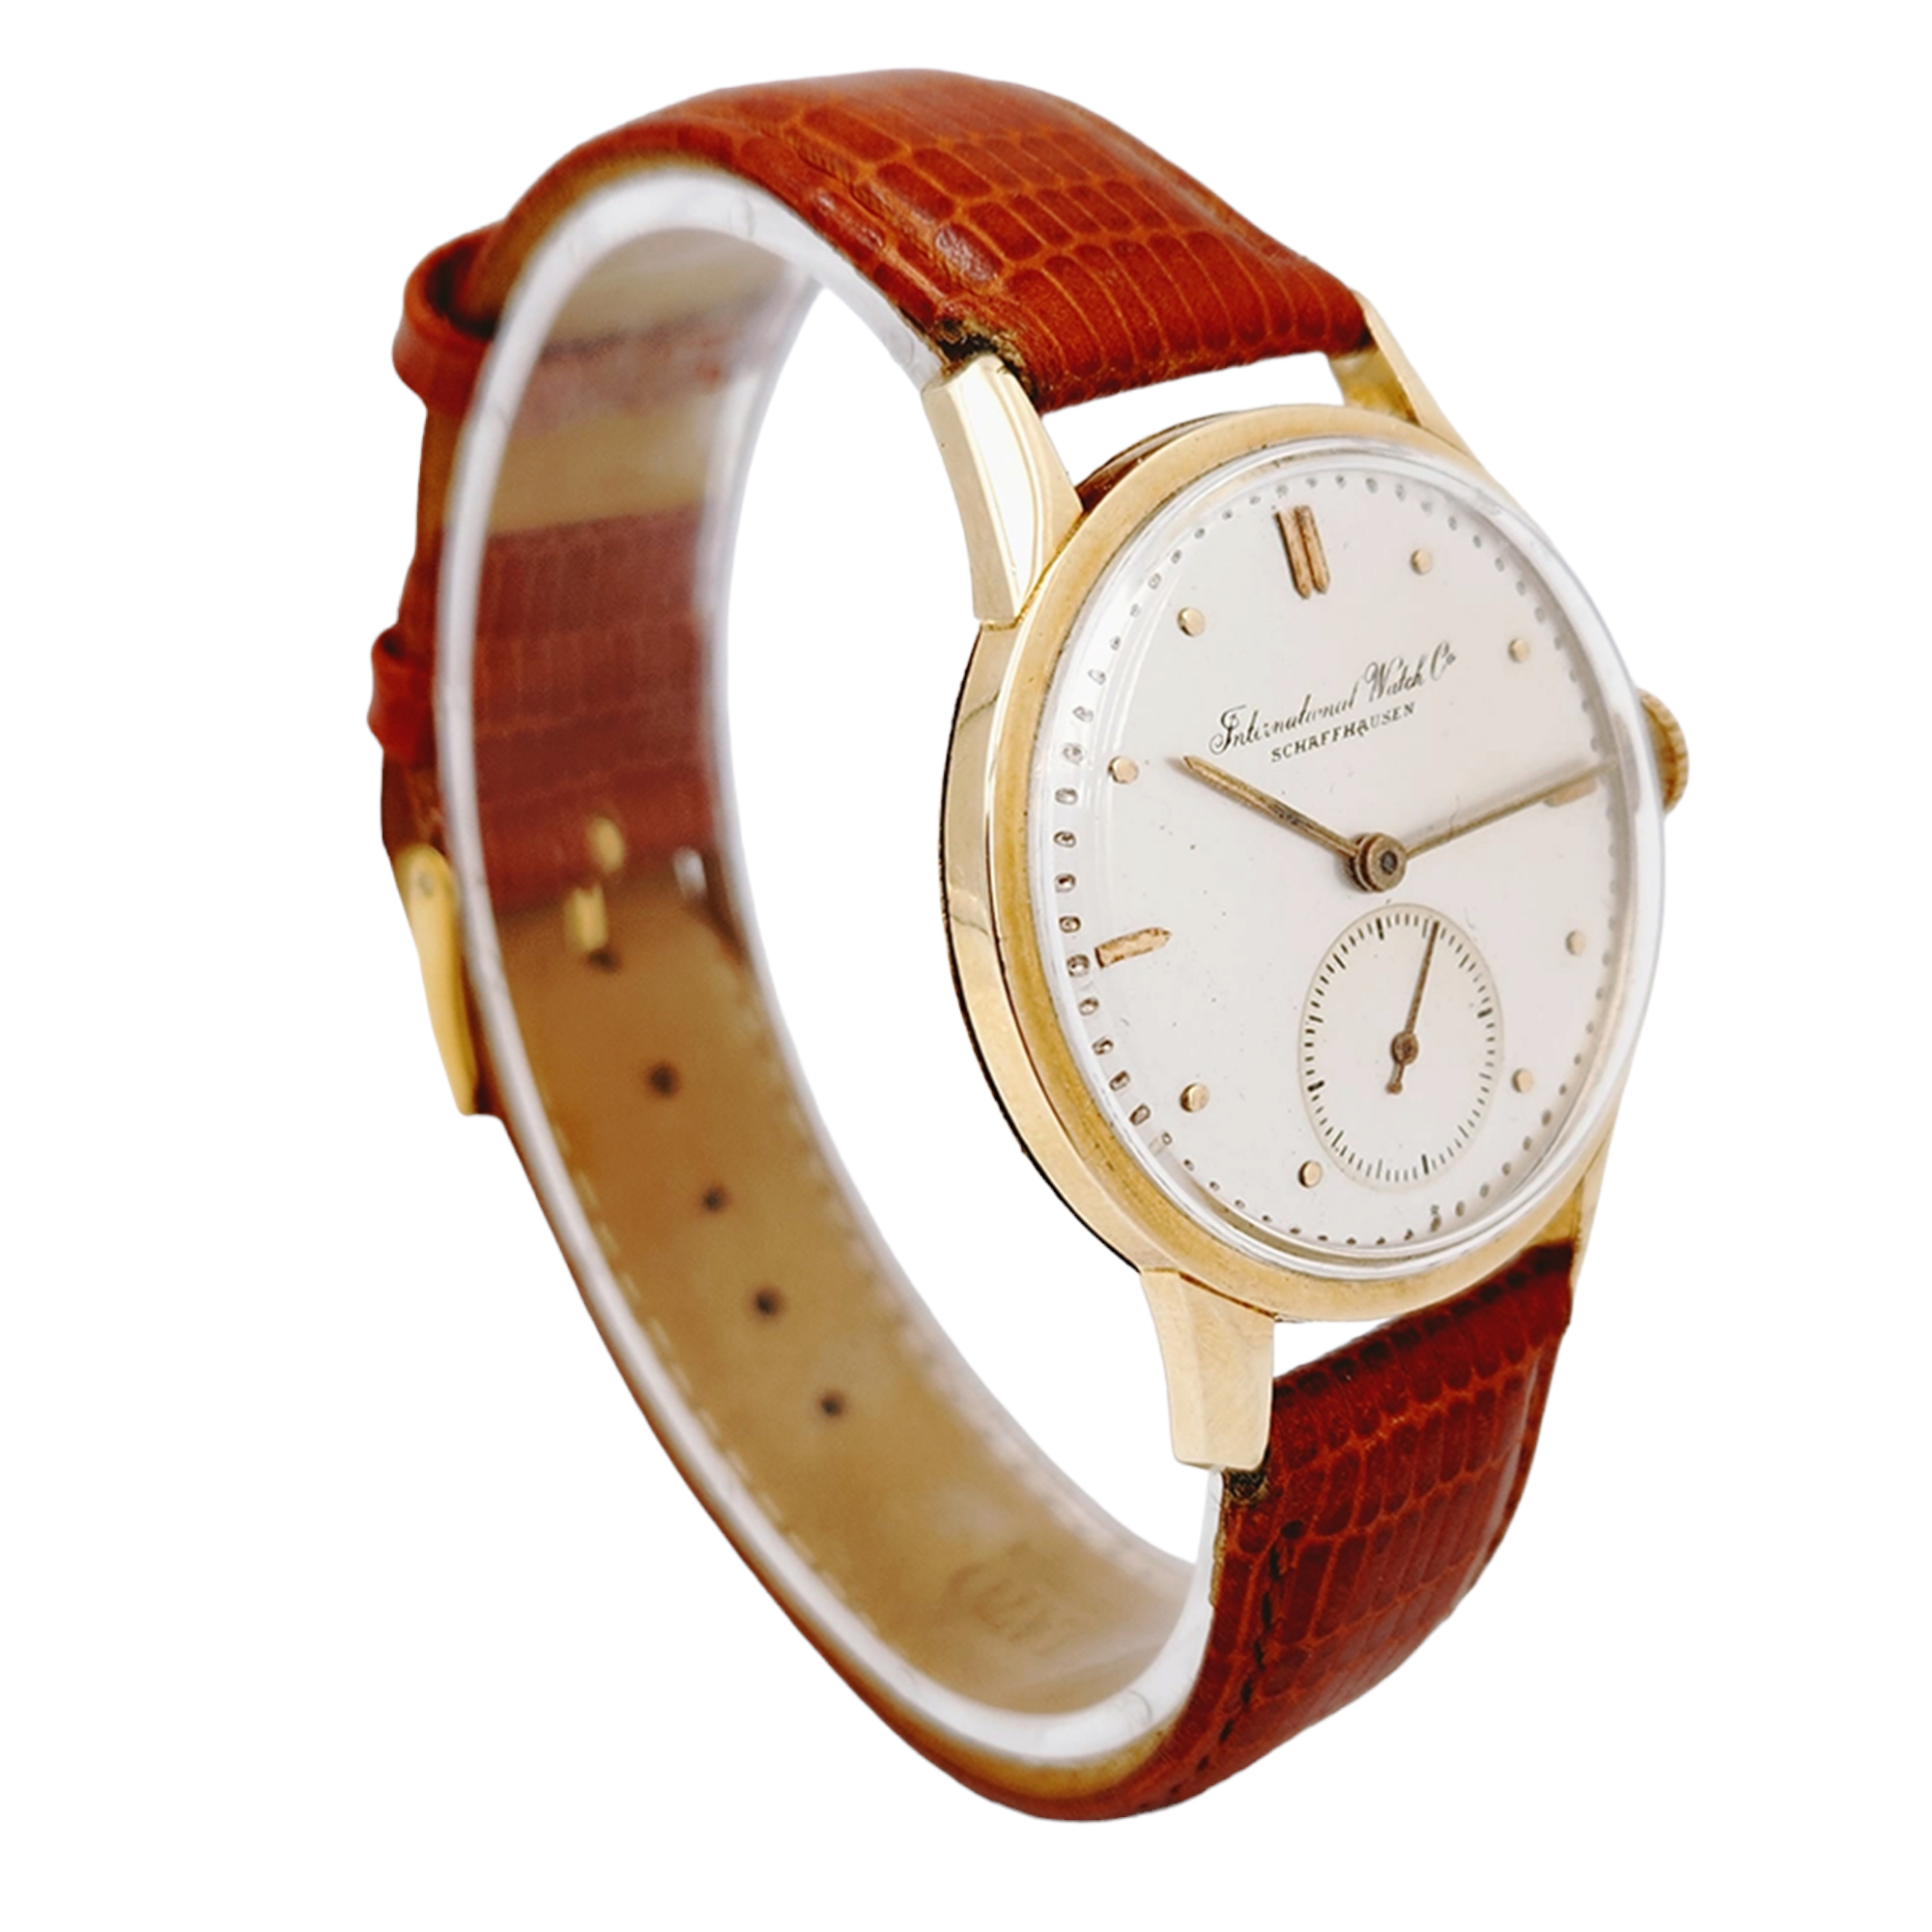 Men's IWC Schaffhausen 34mm Vintage 18K Yellow Gold Automatic Watch with Brown Leather Strap and Silver Dial. (Pre-Owned)